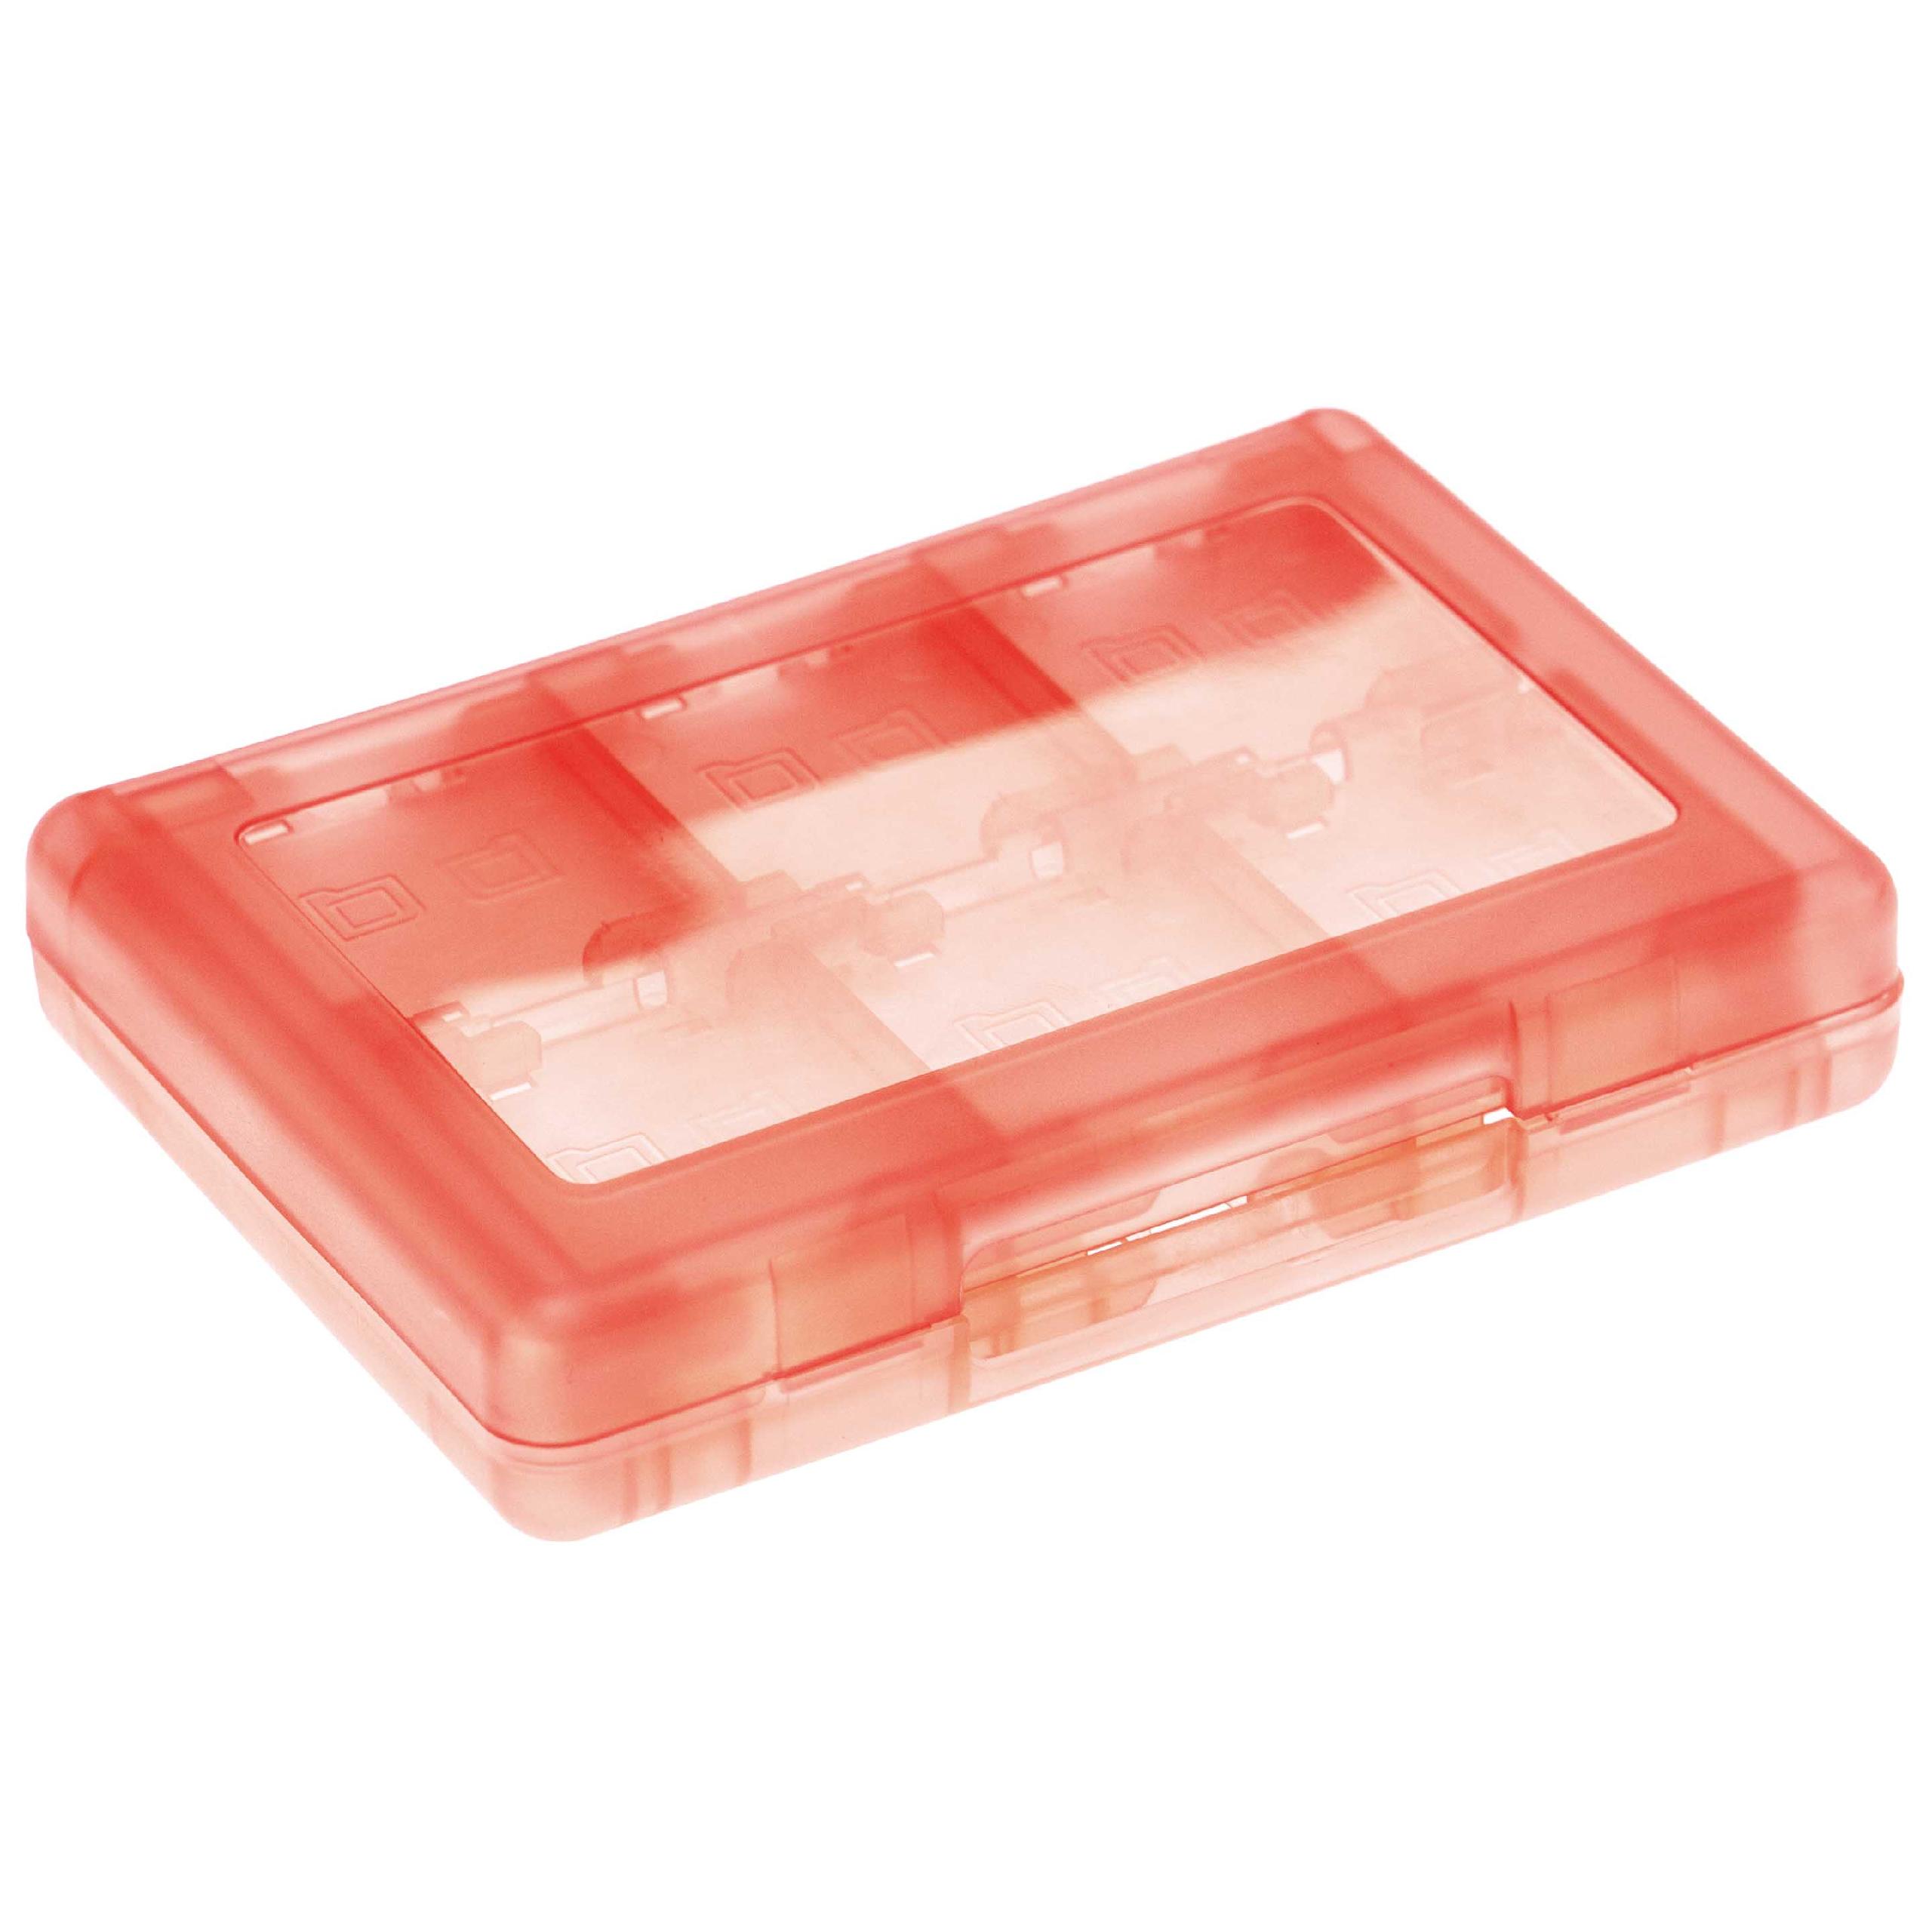 Carrying Case for Console Games and Memory Cards suitable for Nintendo 3DS - plastic, transparent / red